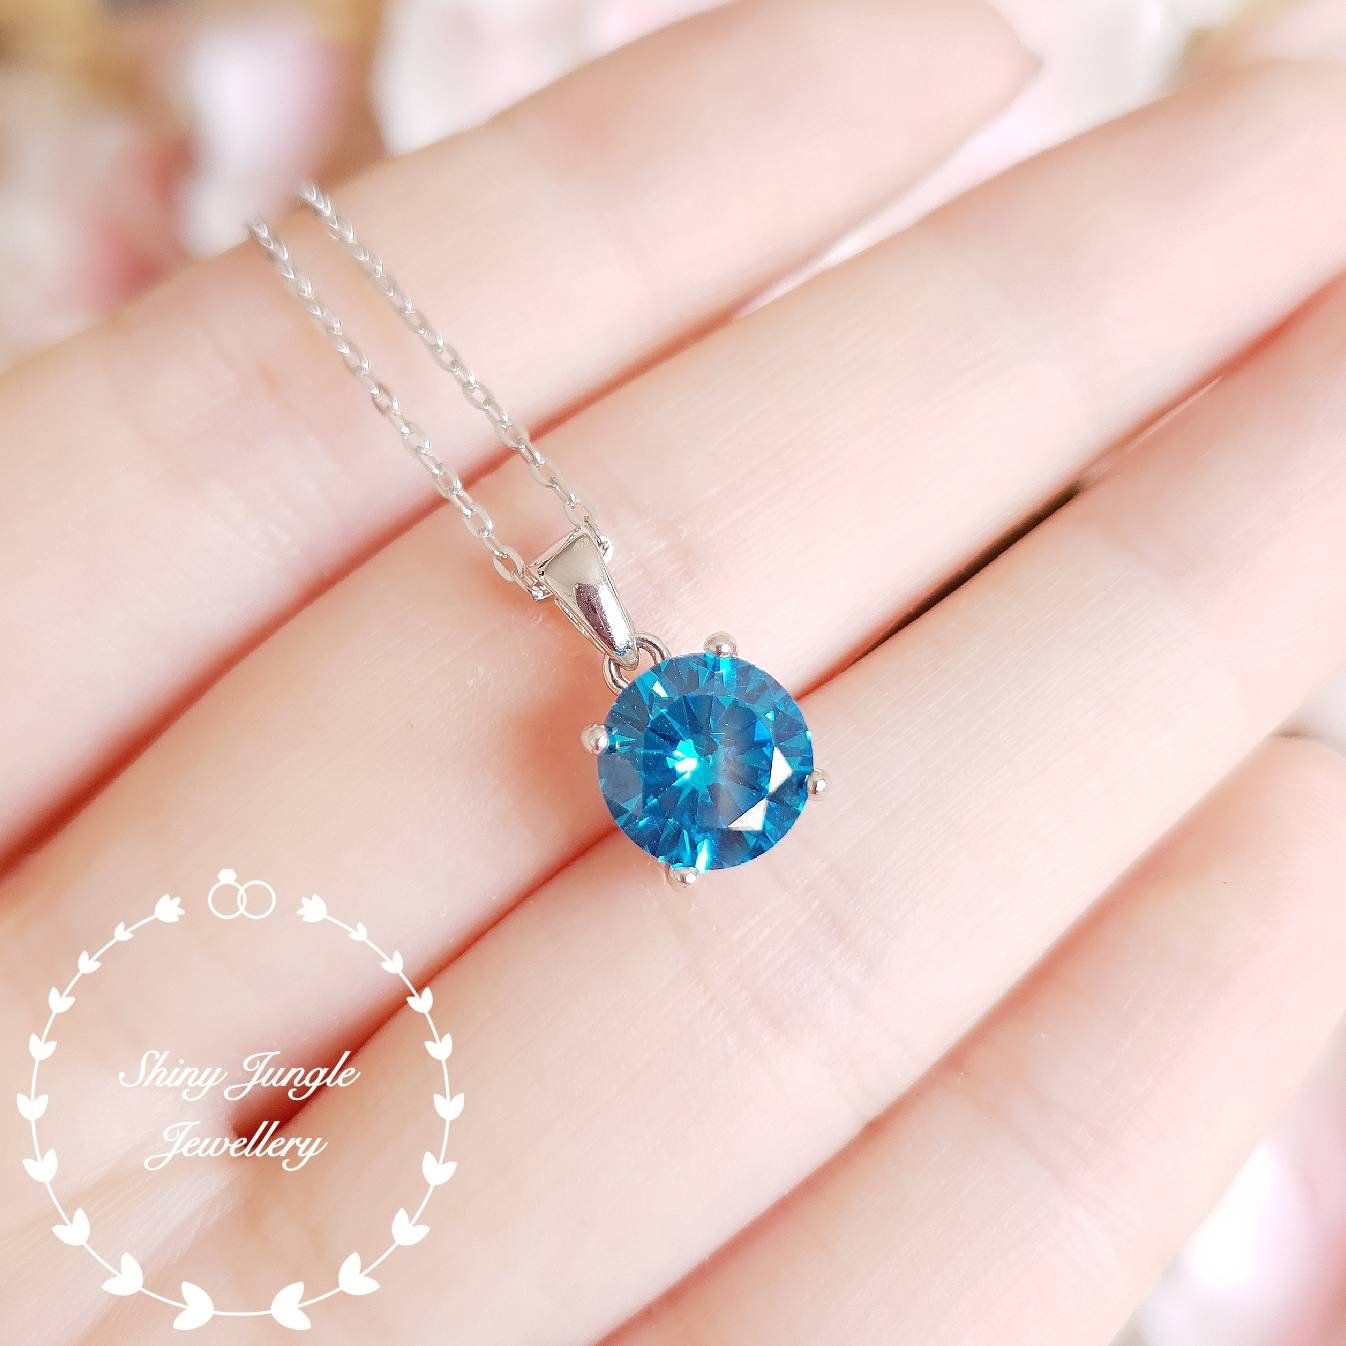 Swiss Blue Topaz Pendant, 2 Carats Round Cut Blue Topaz Necklace Pertaining To 2020 London Blue December Birthstone Locket Element Necklaces (View 9 of 25)